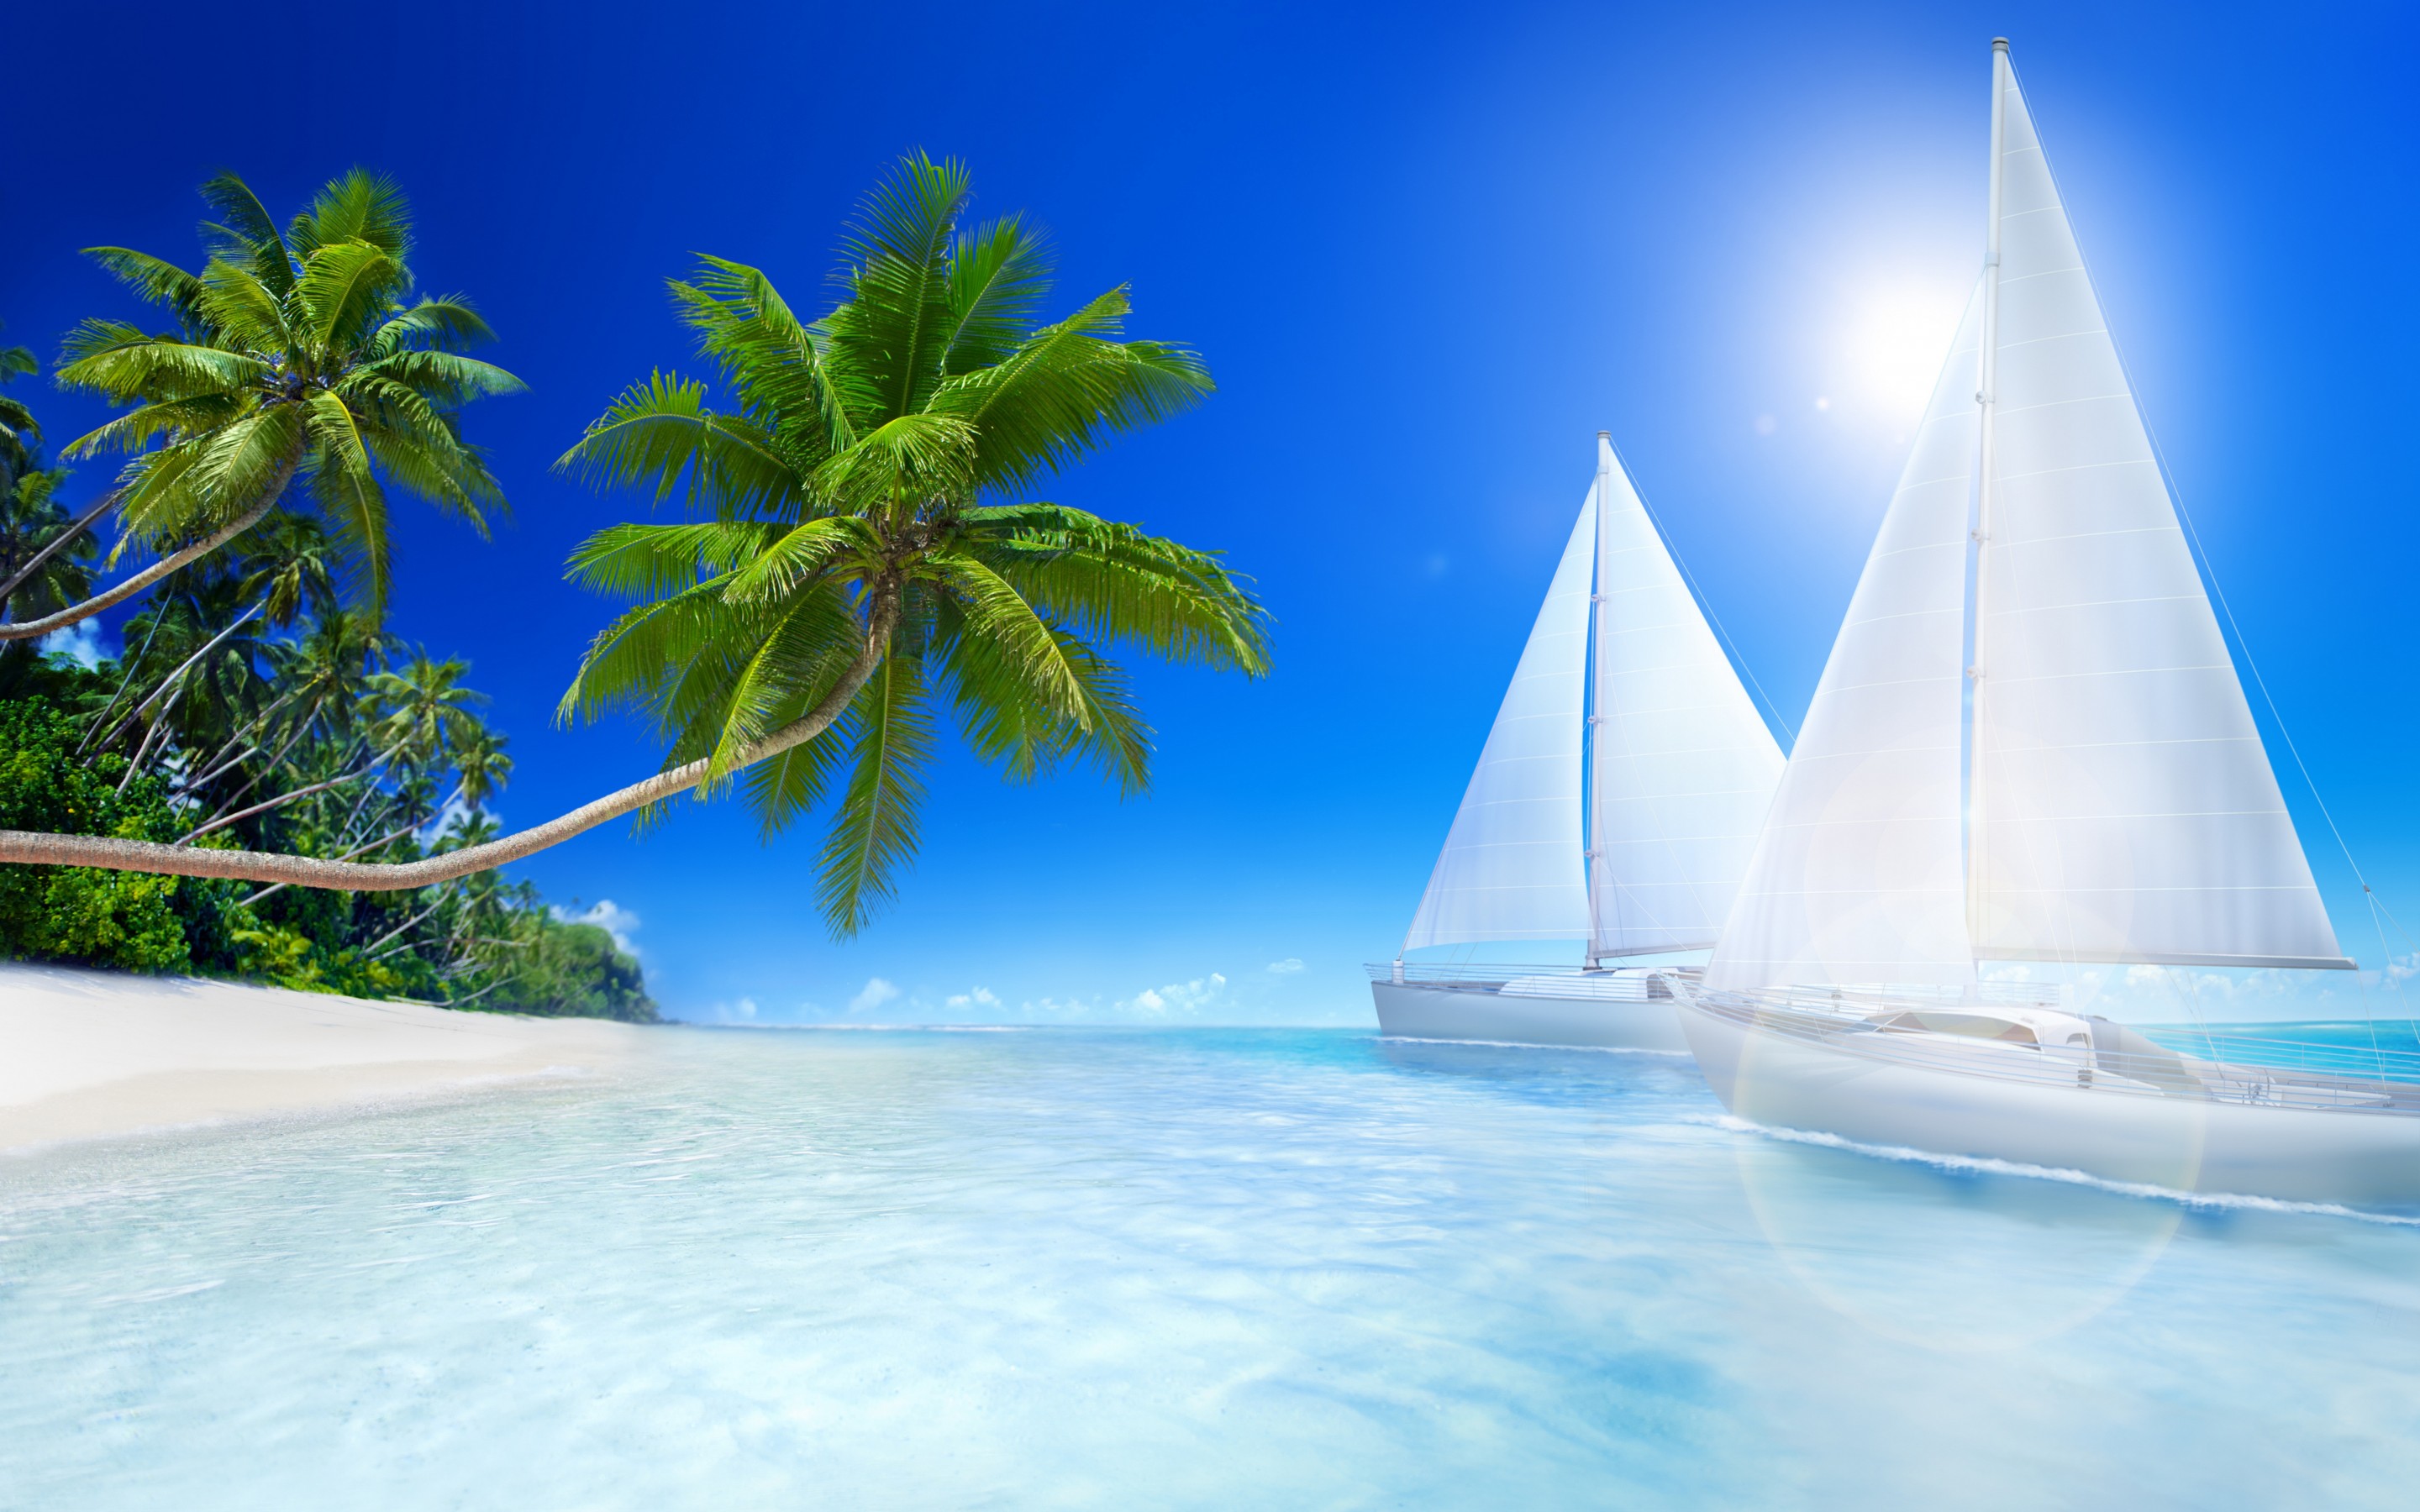 Tropical beach, palms and sailboat on the sea